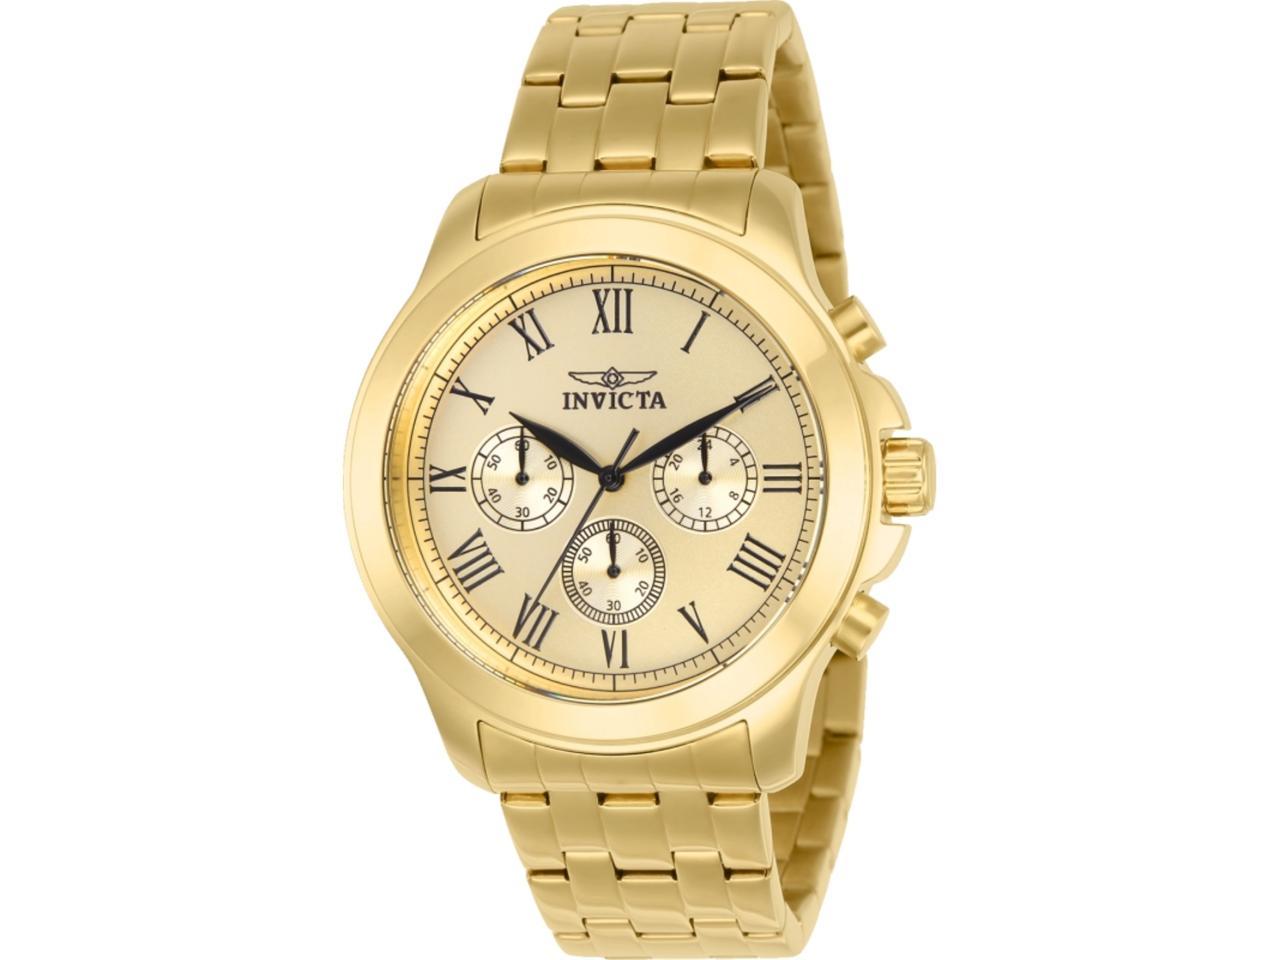 Invicta Specialty 21658 Stainless Steel Chronograph Watch - Newegg.com